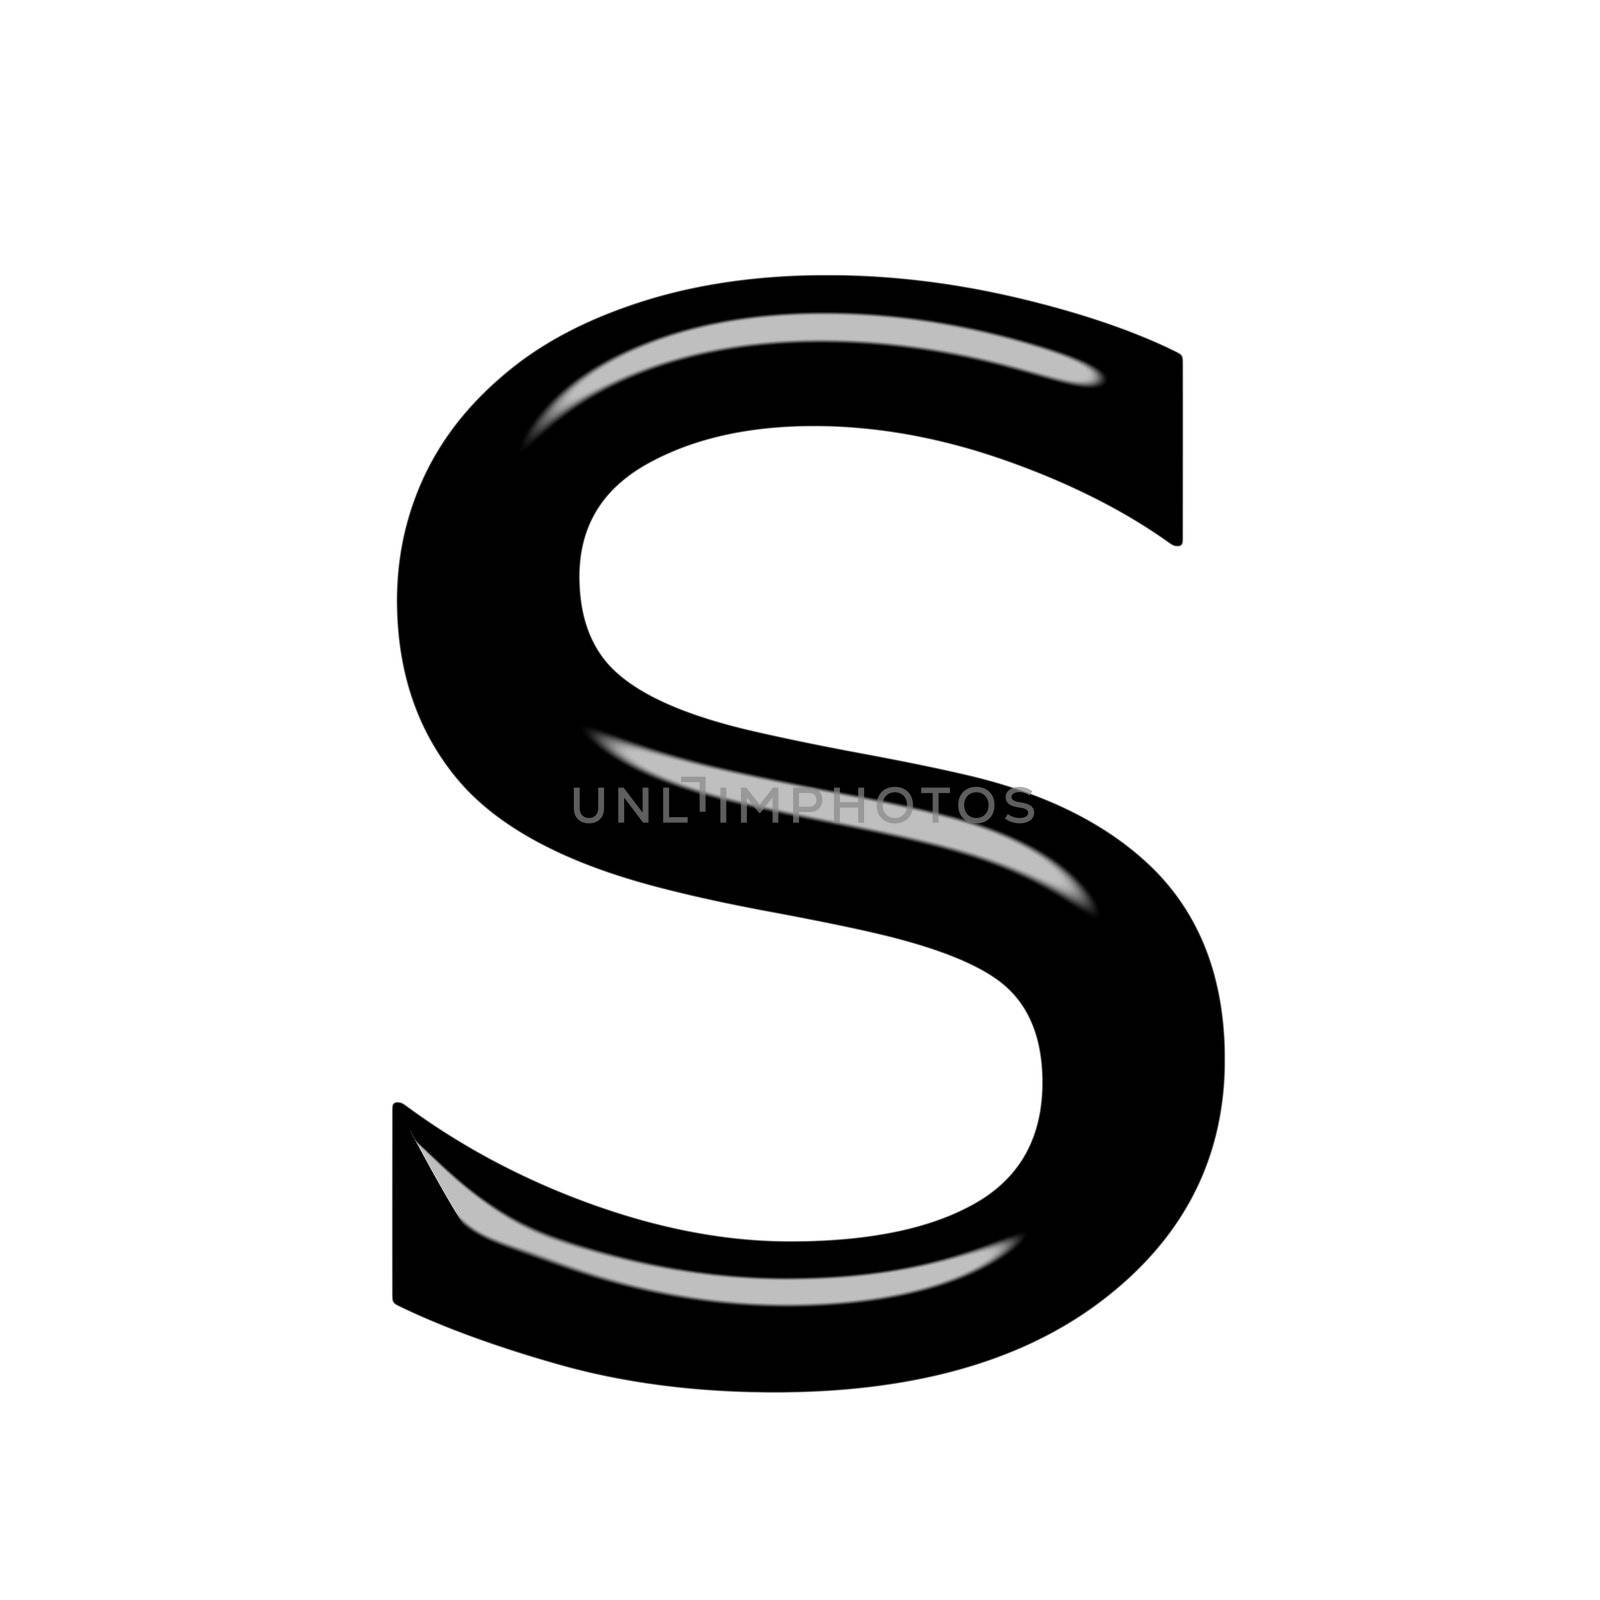 3d letter s by Georgios